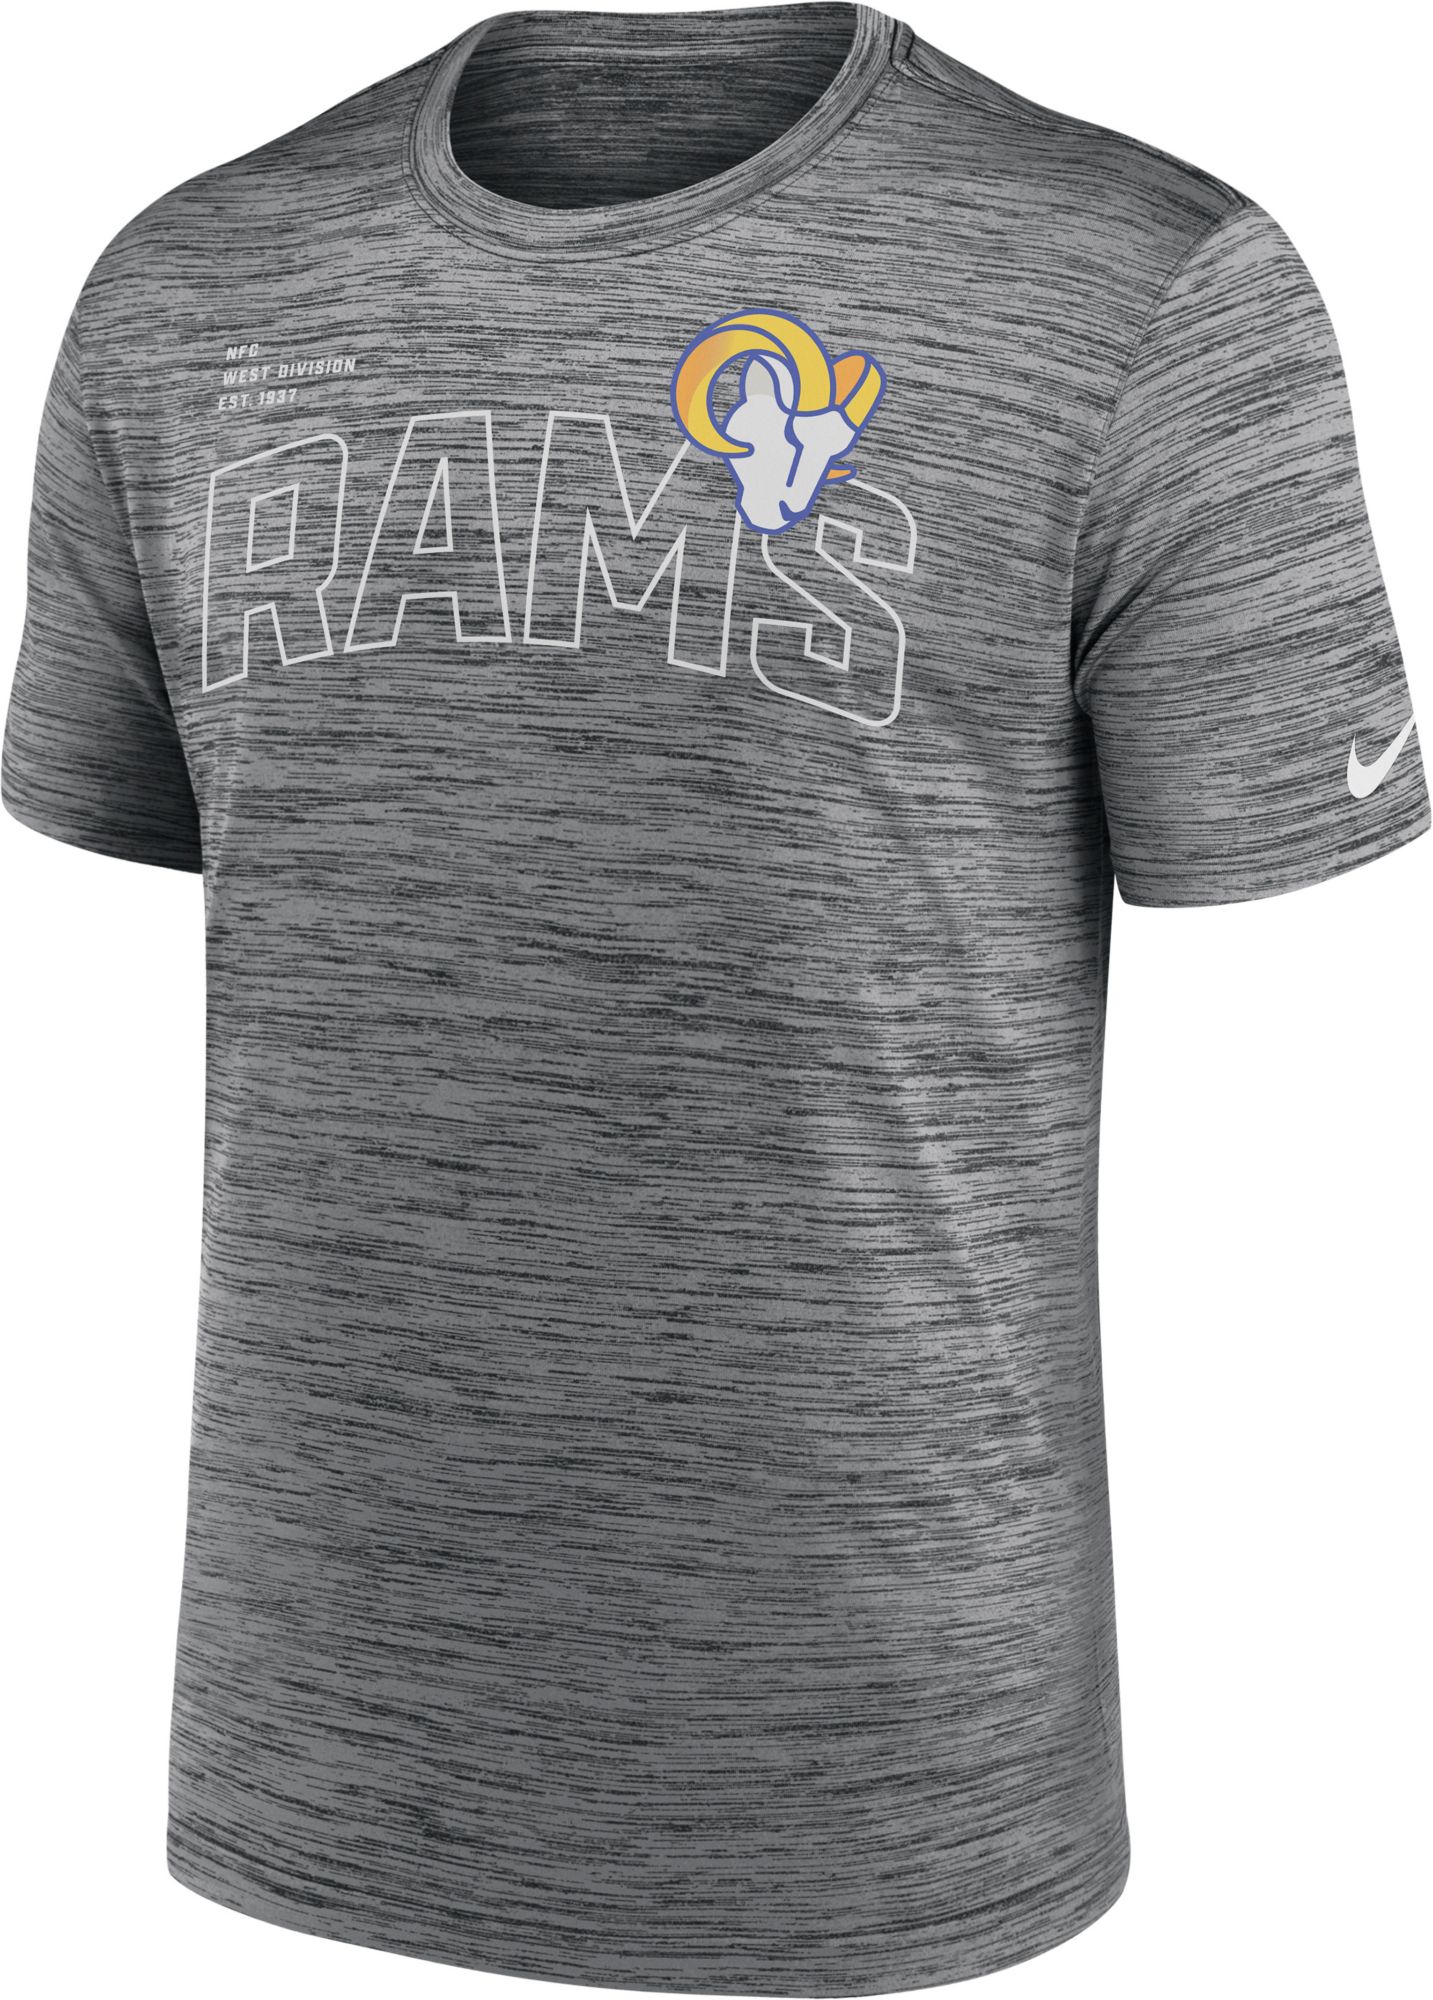 Cooper Kupp 10 Los Angeles Rams Youth Atmosphere Game Jersey - Gray -  Bluefink